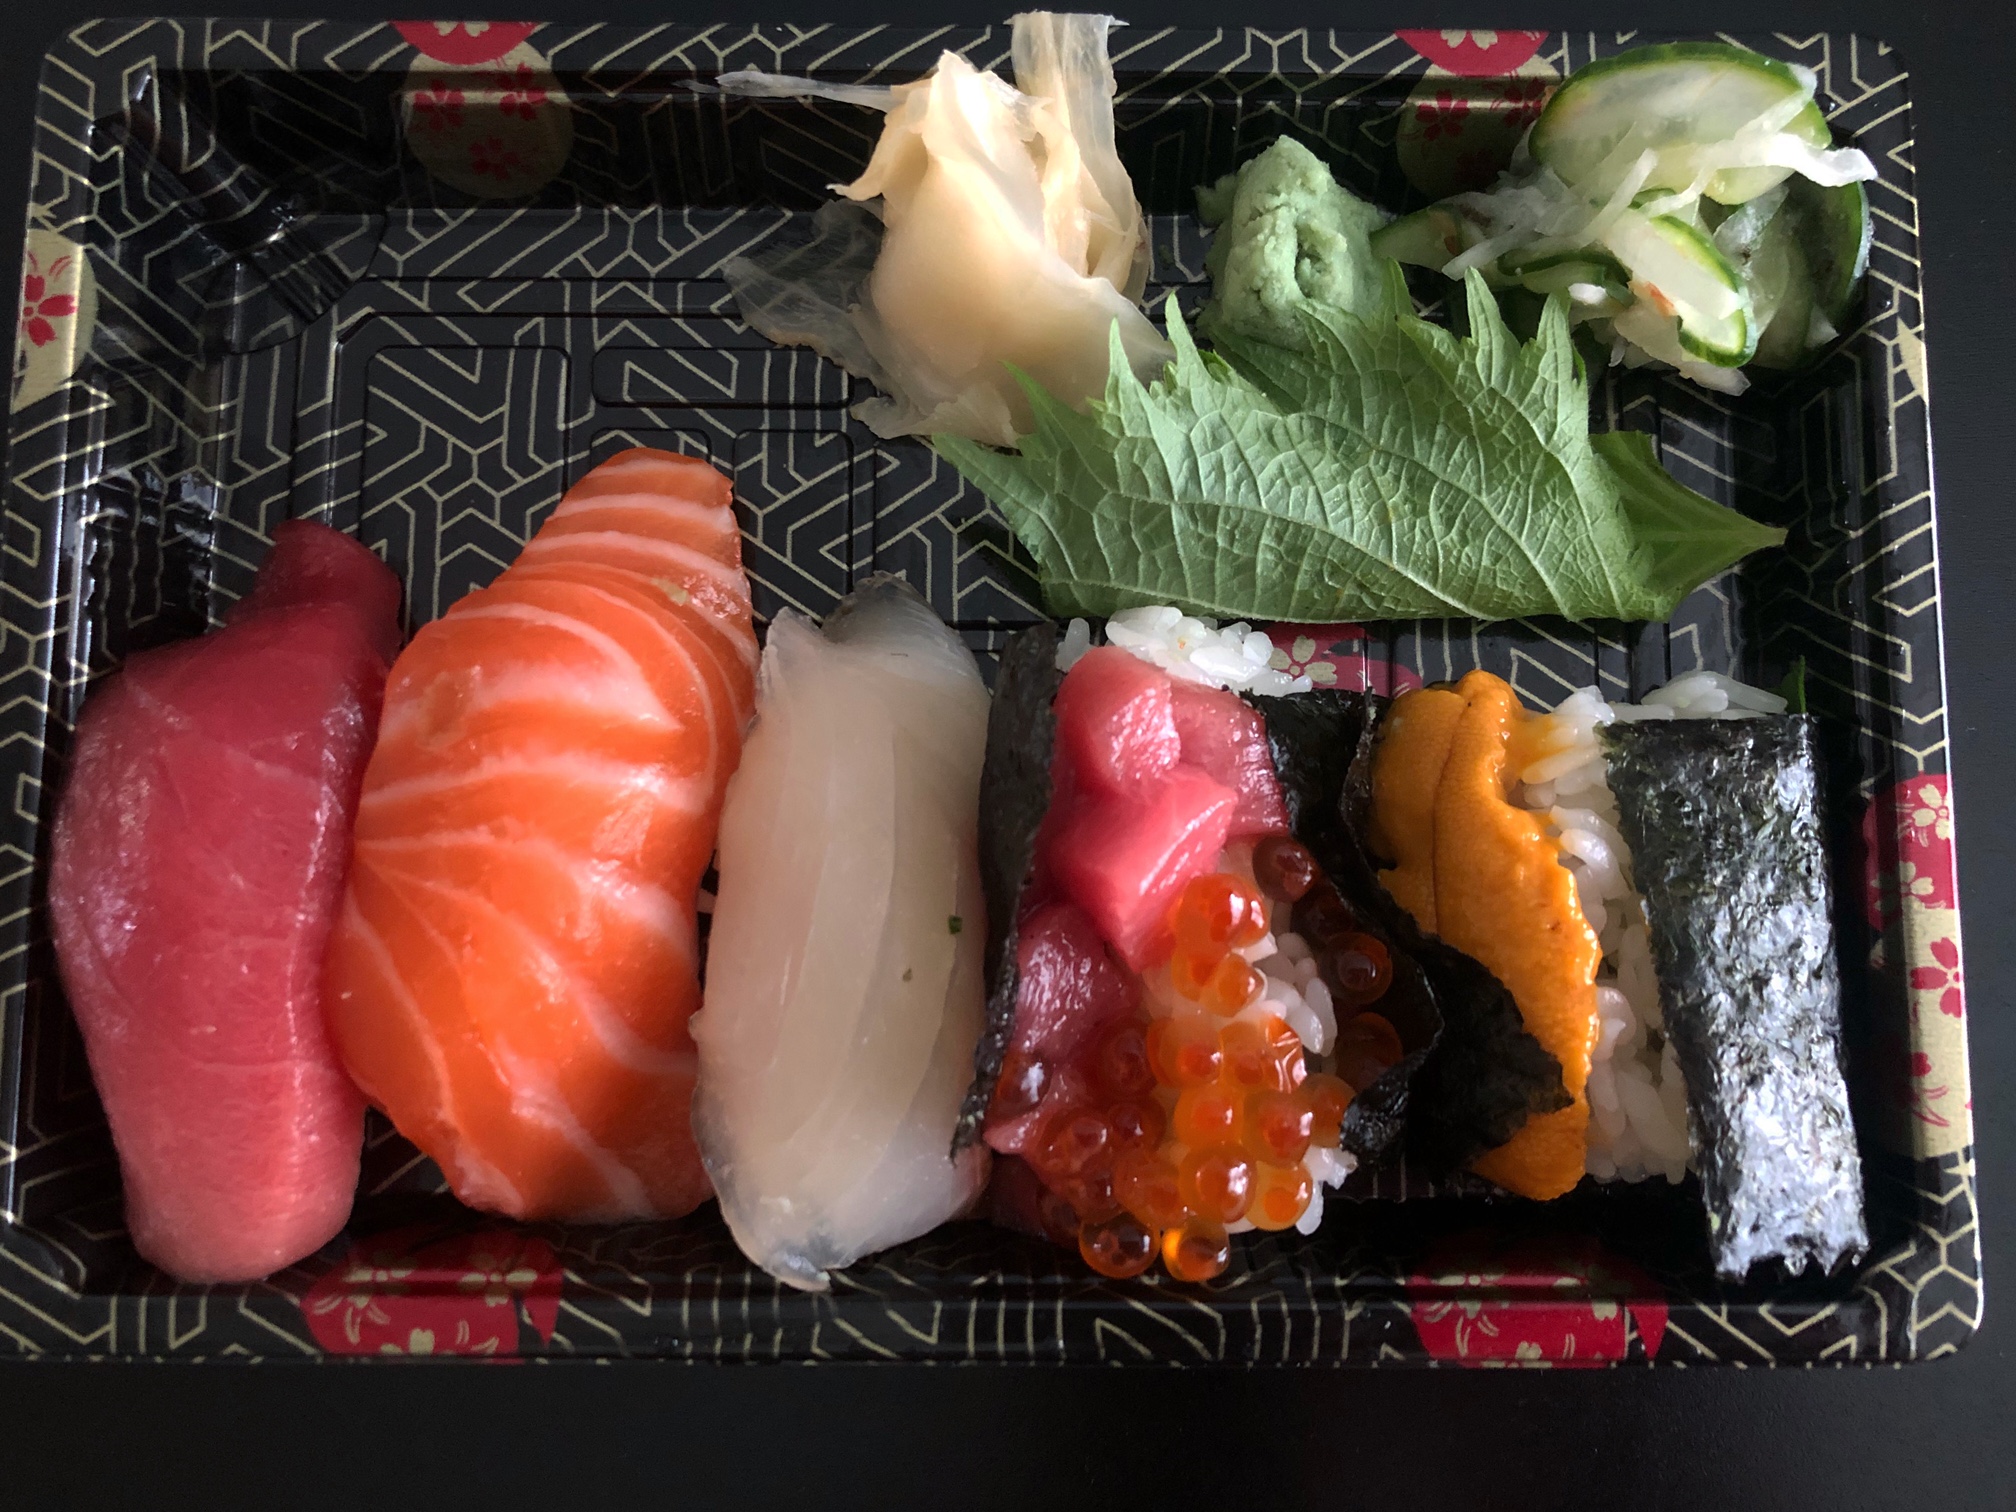 From above, there is a rectangular container with five pieces of nigiri. Photo by Alyssa Buckley.